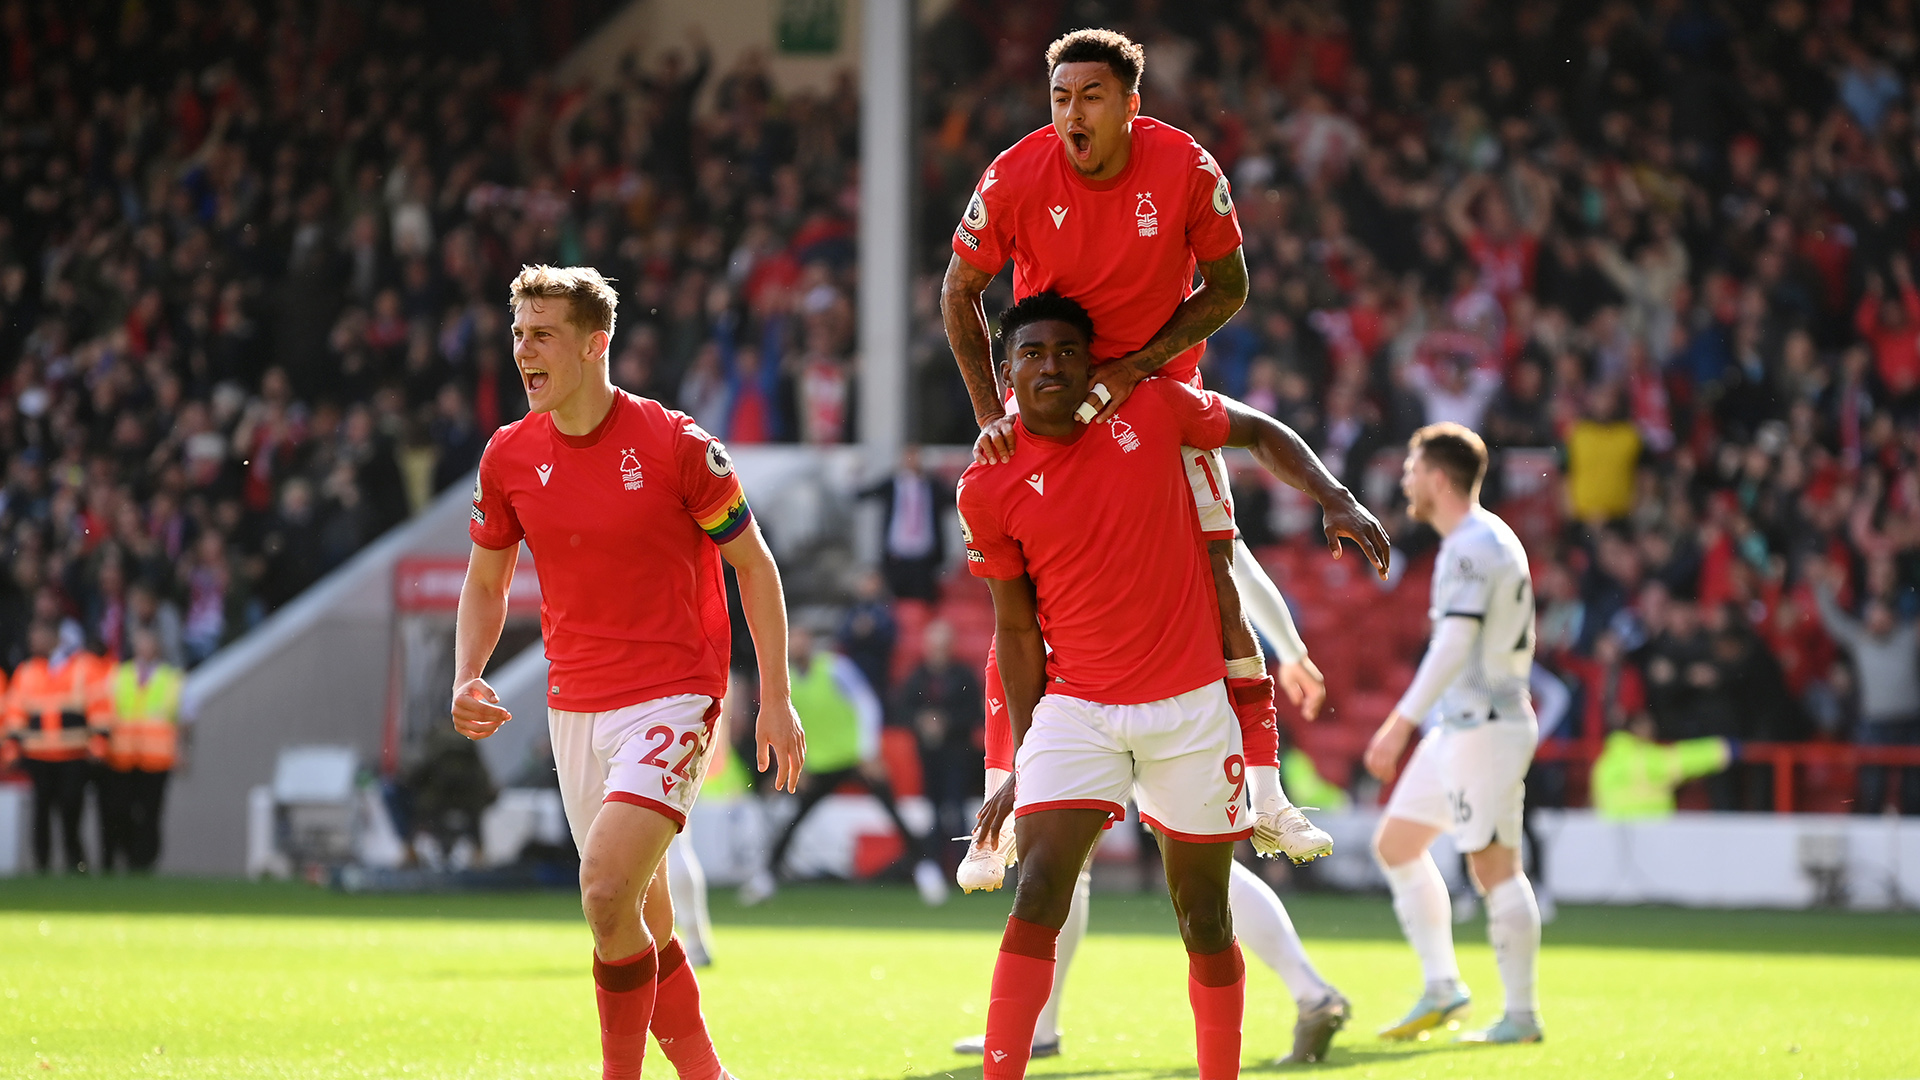 NOTTINGHAM, ENGLAND - OCTOBER 22: Taiwo Awoniyi of Nottingham Forest celebrates with teammates Ryan Yates and Jesse Lingard after scoring their team's first goal during the Premier League match between Nottingham Forest and Liverpool FC at City Ground on October 22, 2022 in Nottingham, England. (Photo by Michael Regan/Getty Images)